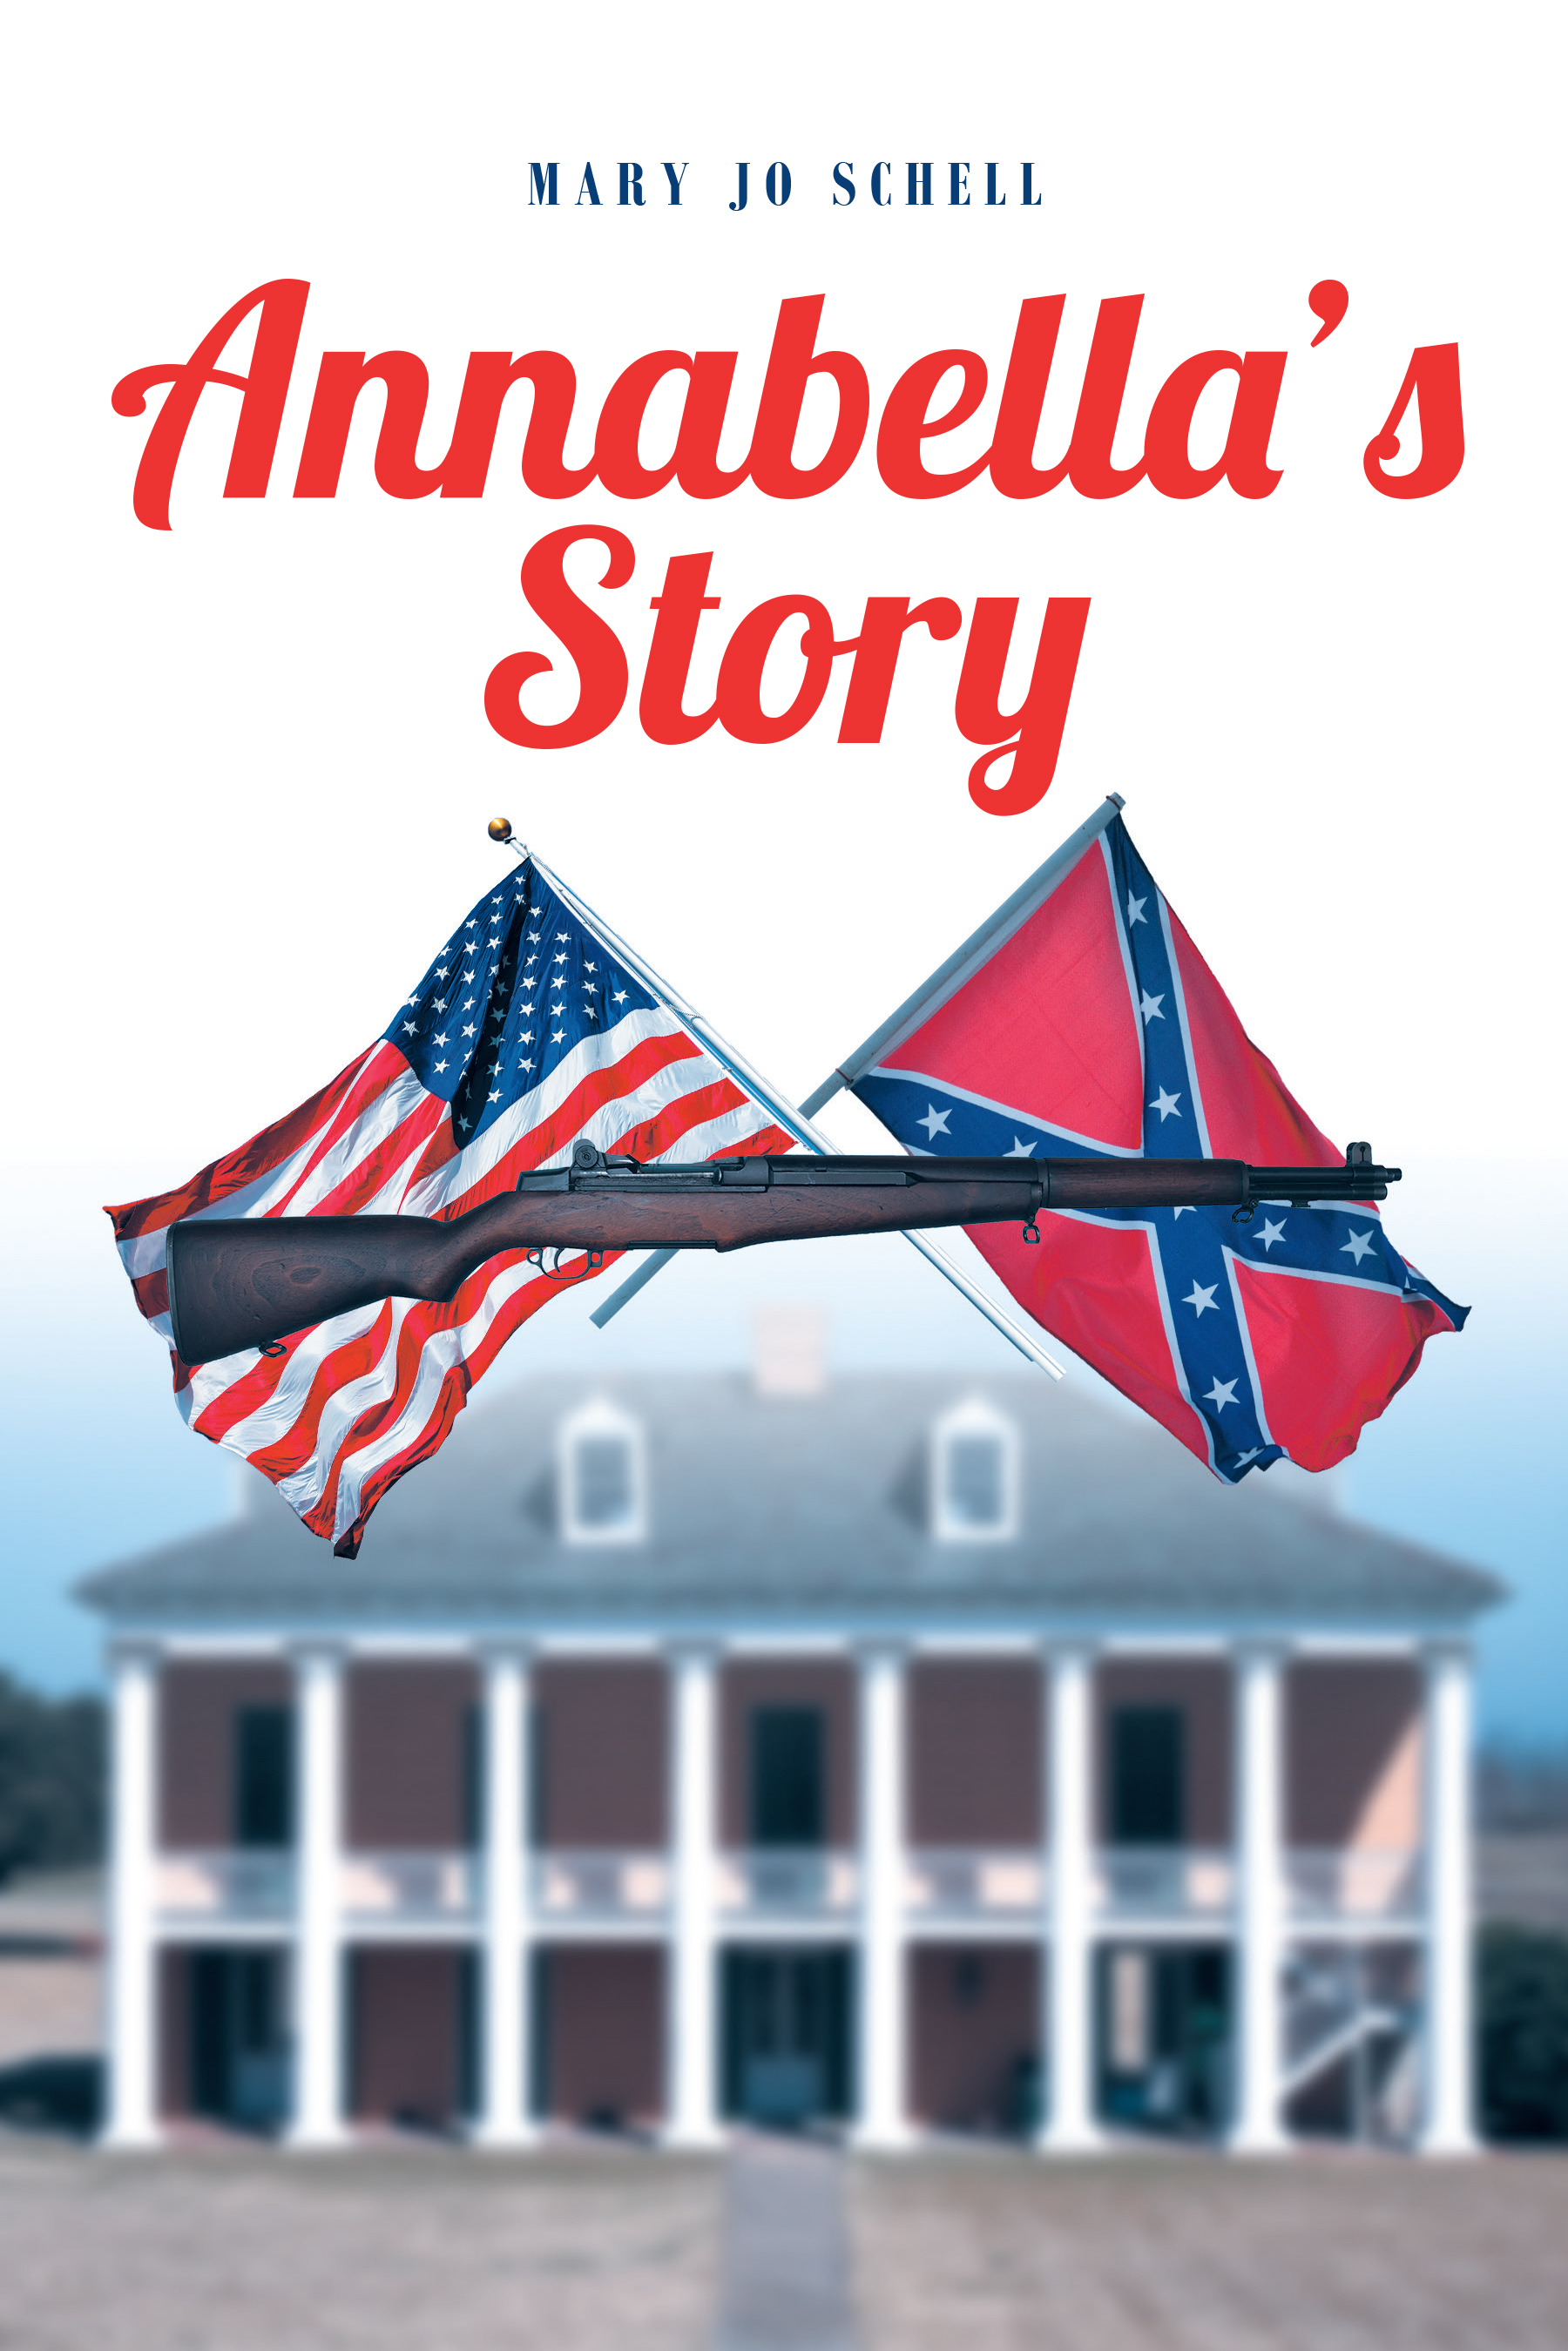 Mary Jo Schell’s New Book, "Annabella’s Story," Centers Around a Young Woman’s Life as She and Her Family Live Through the Civil War on Their Plantation